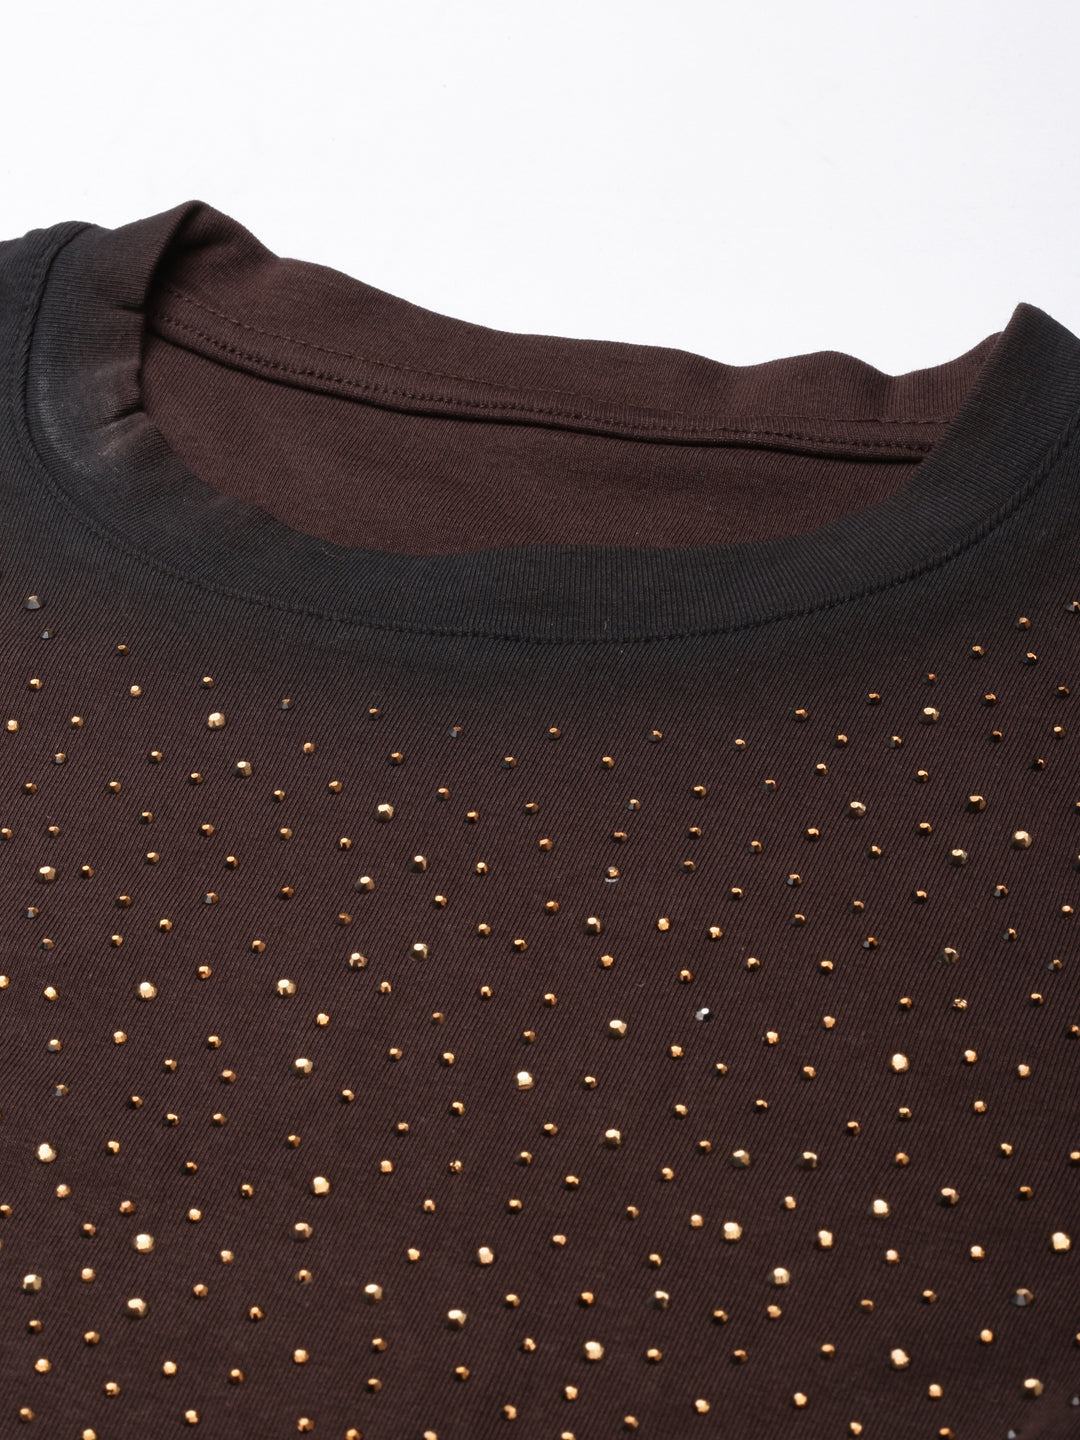 Women Embellished Brown Fitted Top